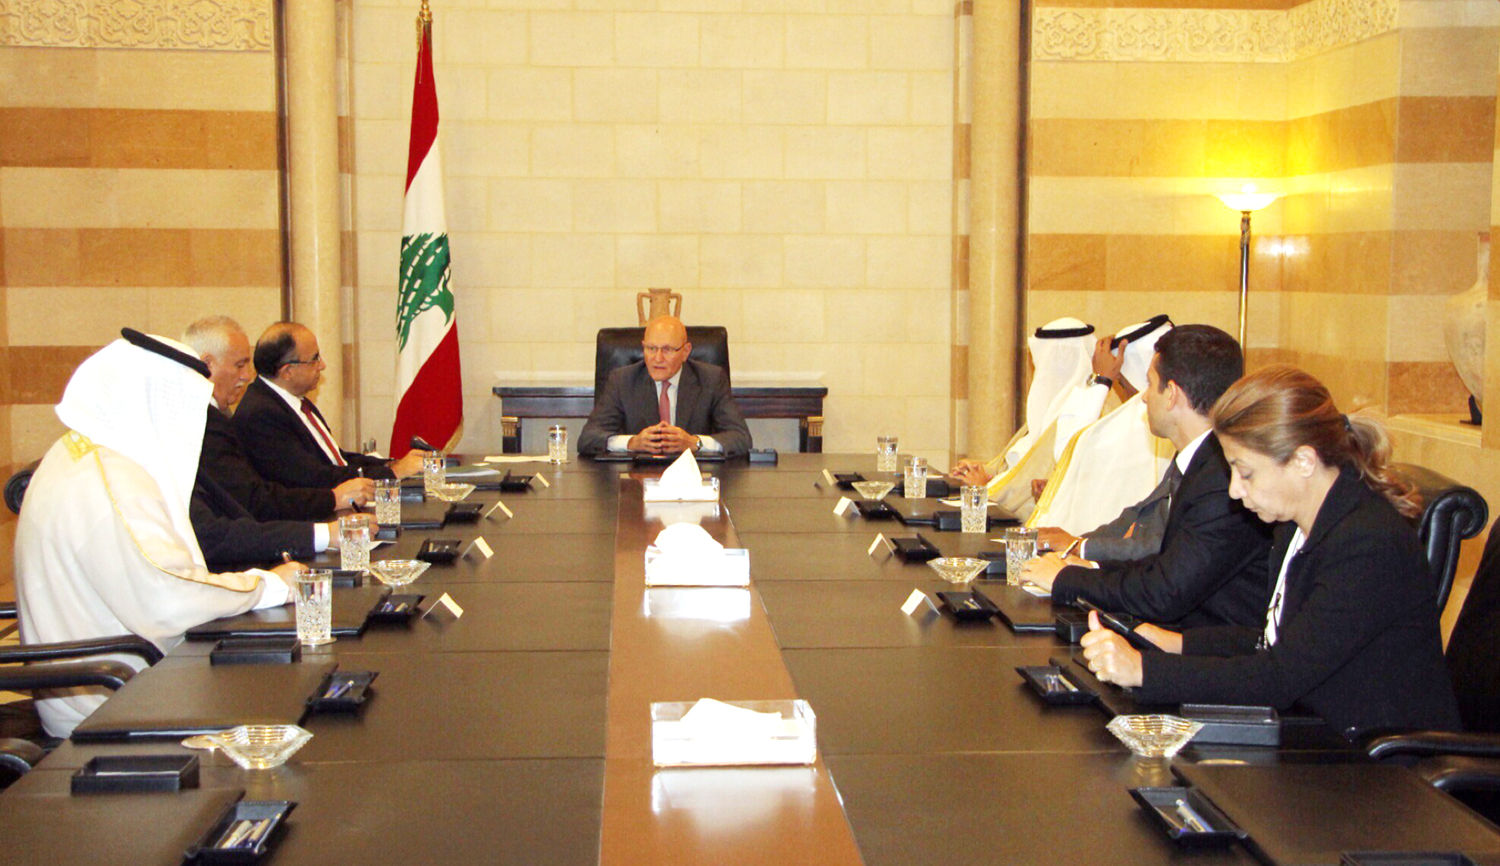 Prime Minister Tammam Salam, in a meeting with Arab ambassadors